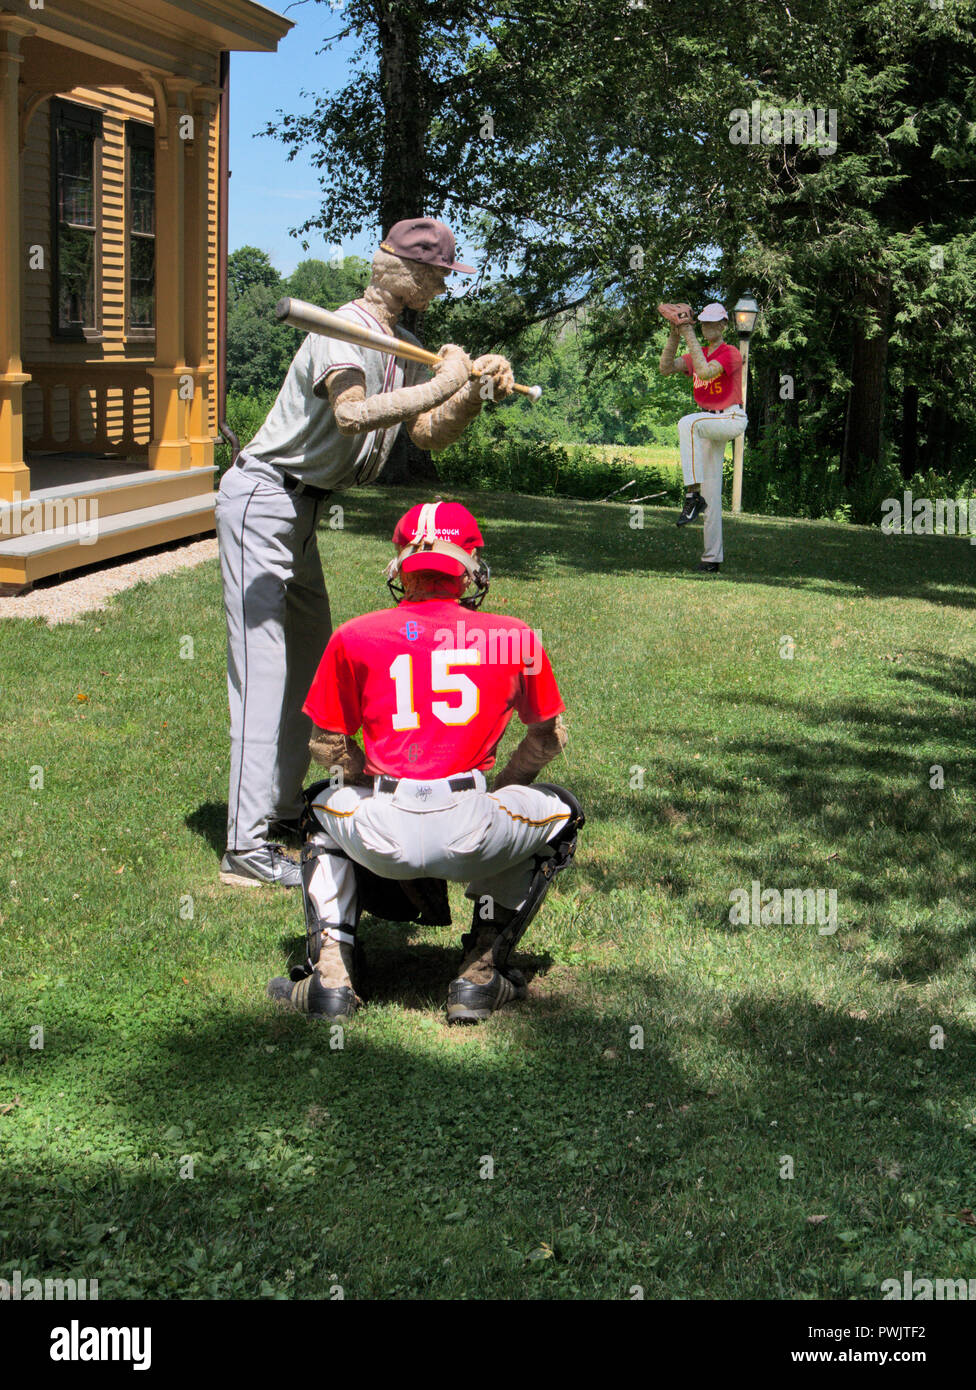 Baseball manikins in front of 'Arrowhead', the home of author Herman Melville,(Moby Dick) Pittsfield MA, USA Stock Photo